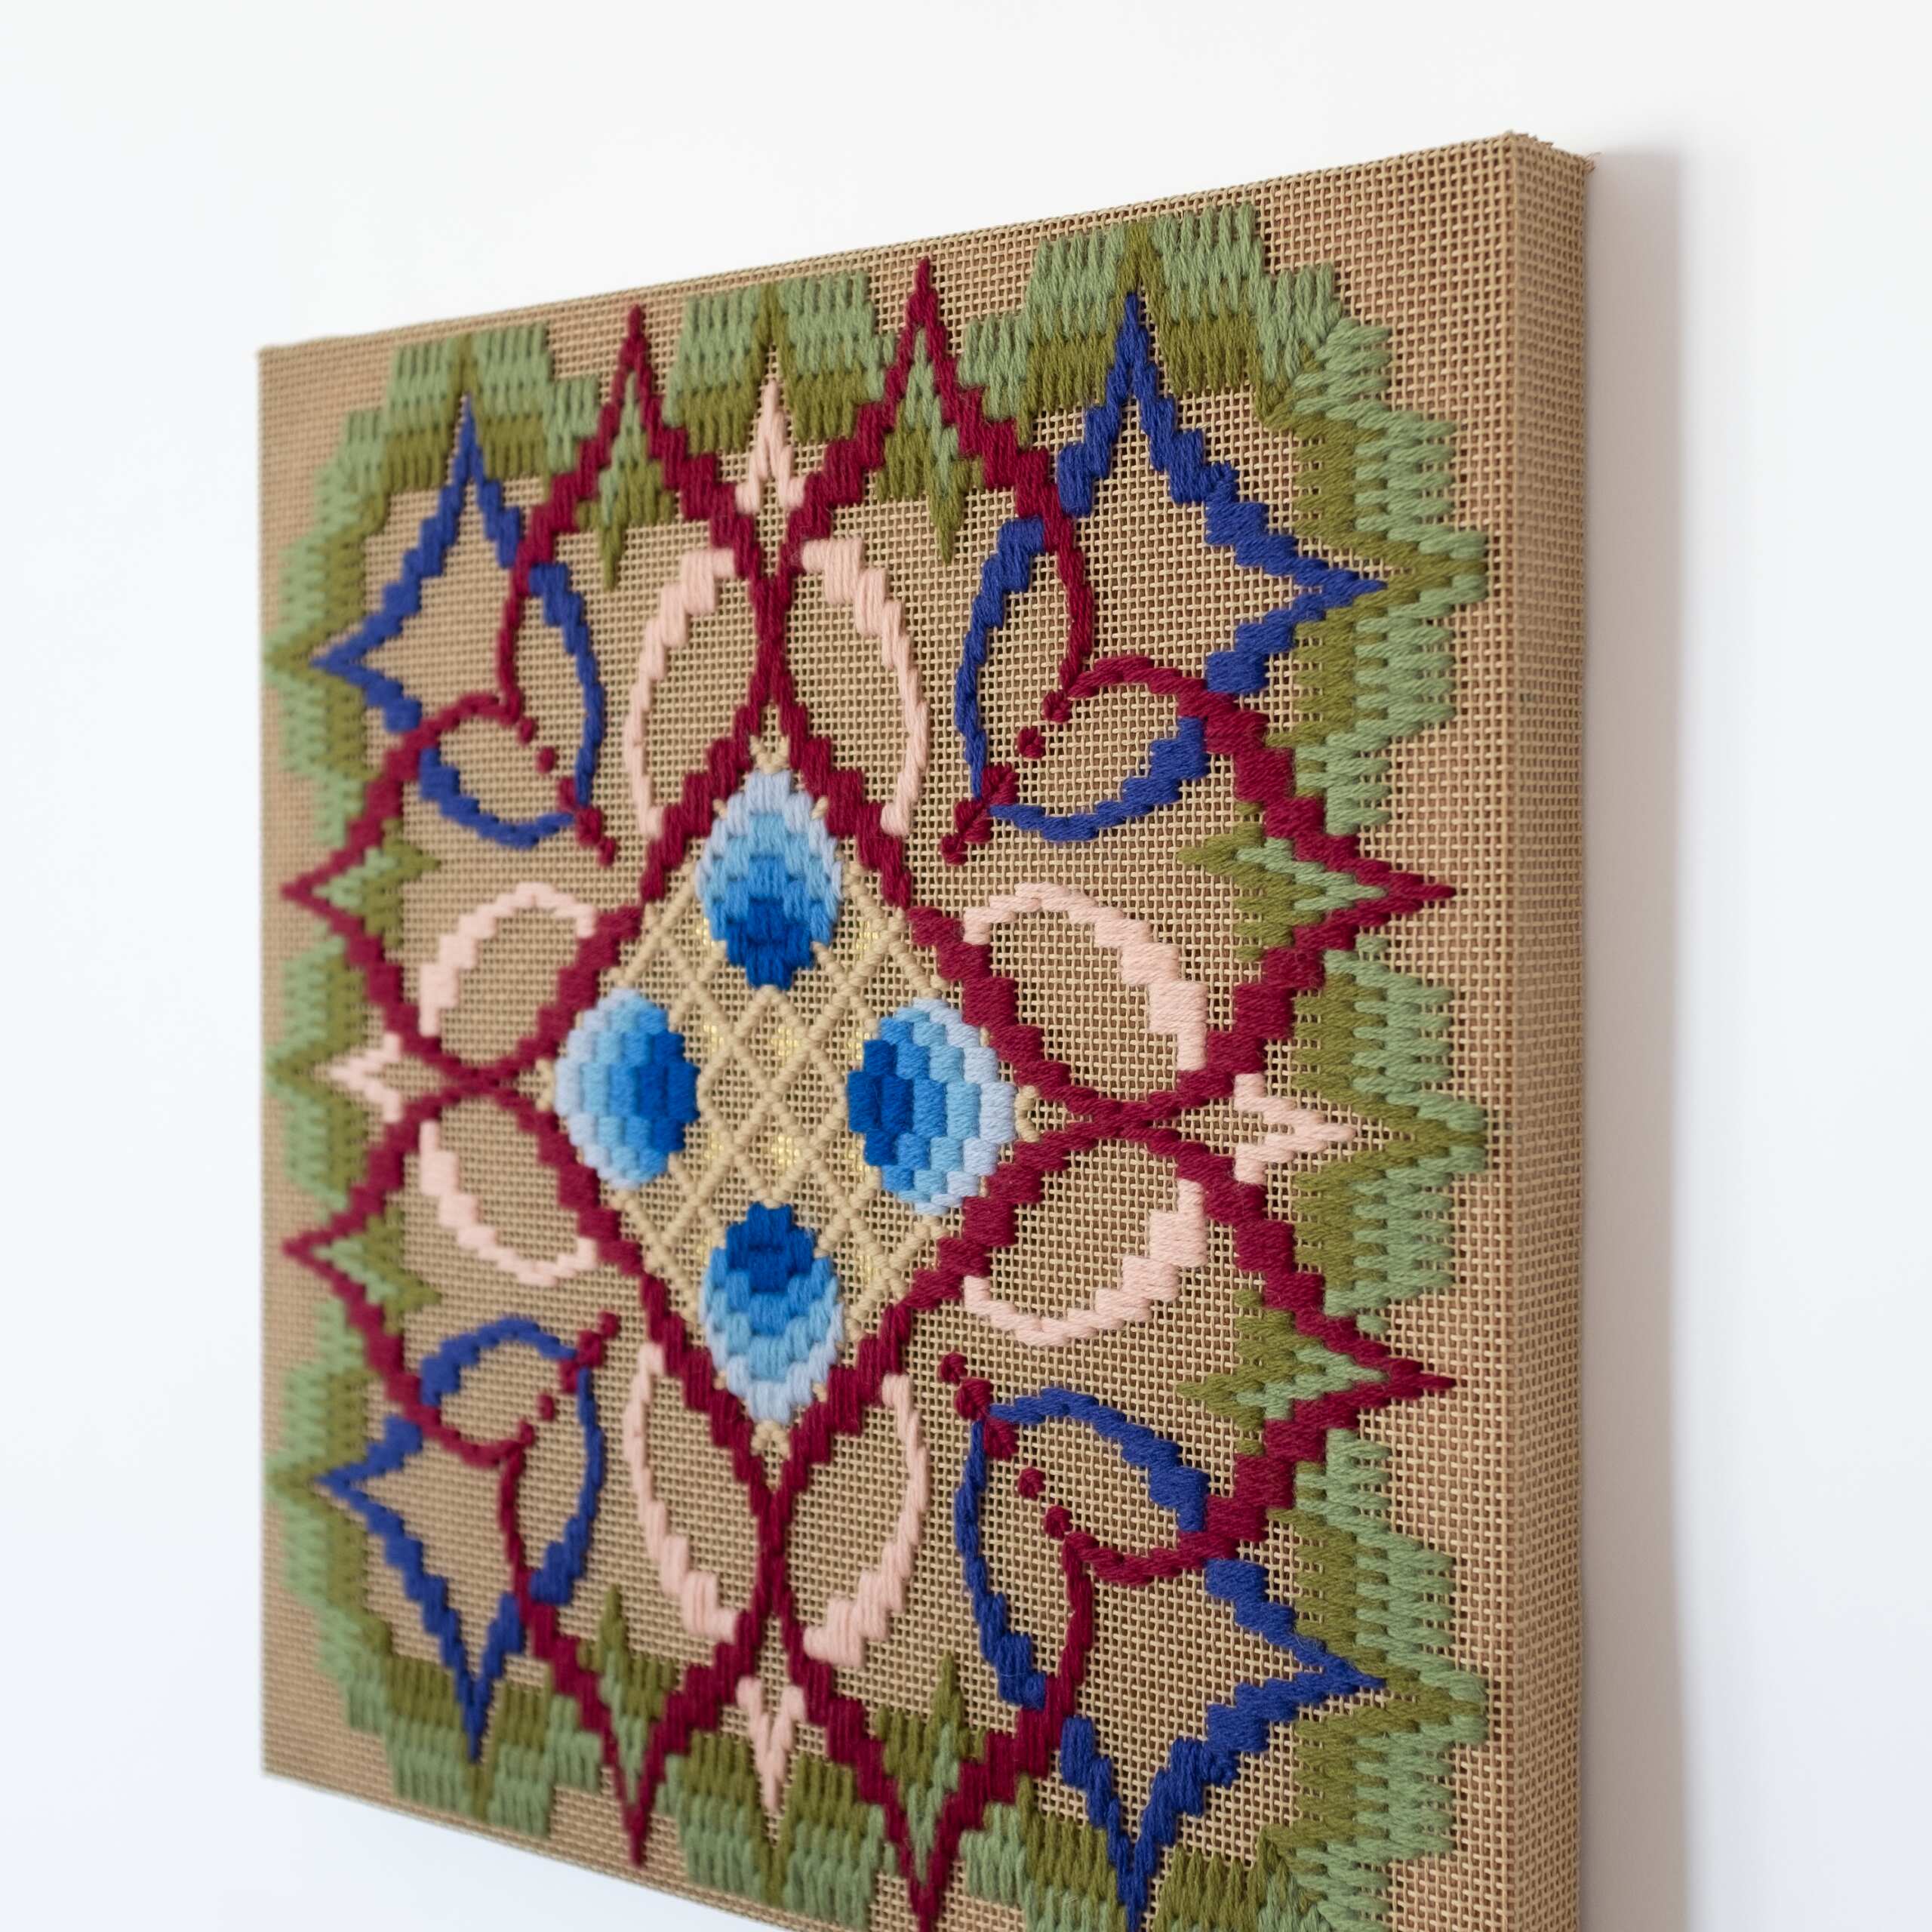 The flower of what's true [blue], Hand-embroidered wool yarn on cotton canvas over cedar panel, 24-carat gold leaf, 2024